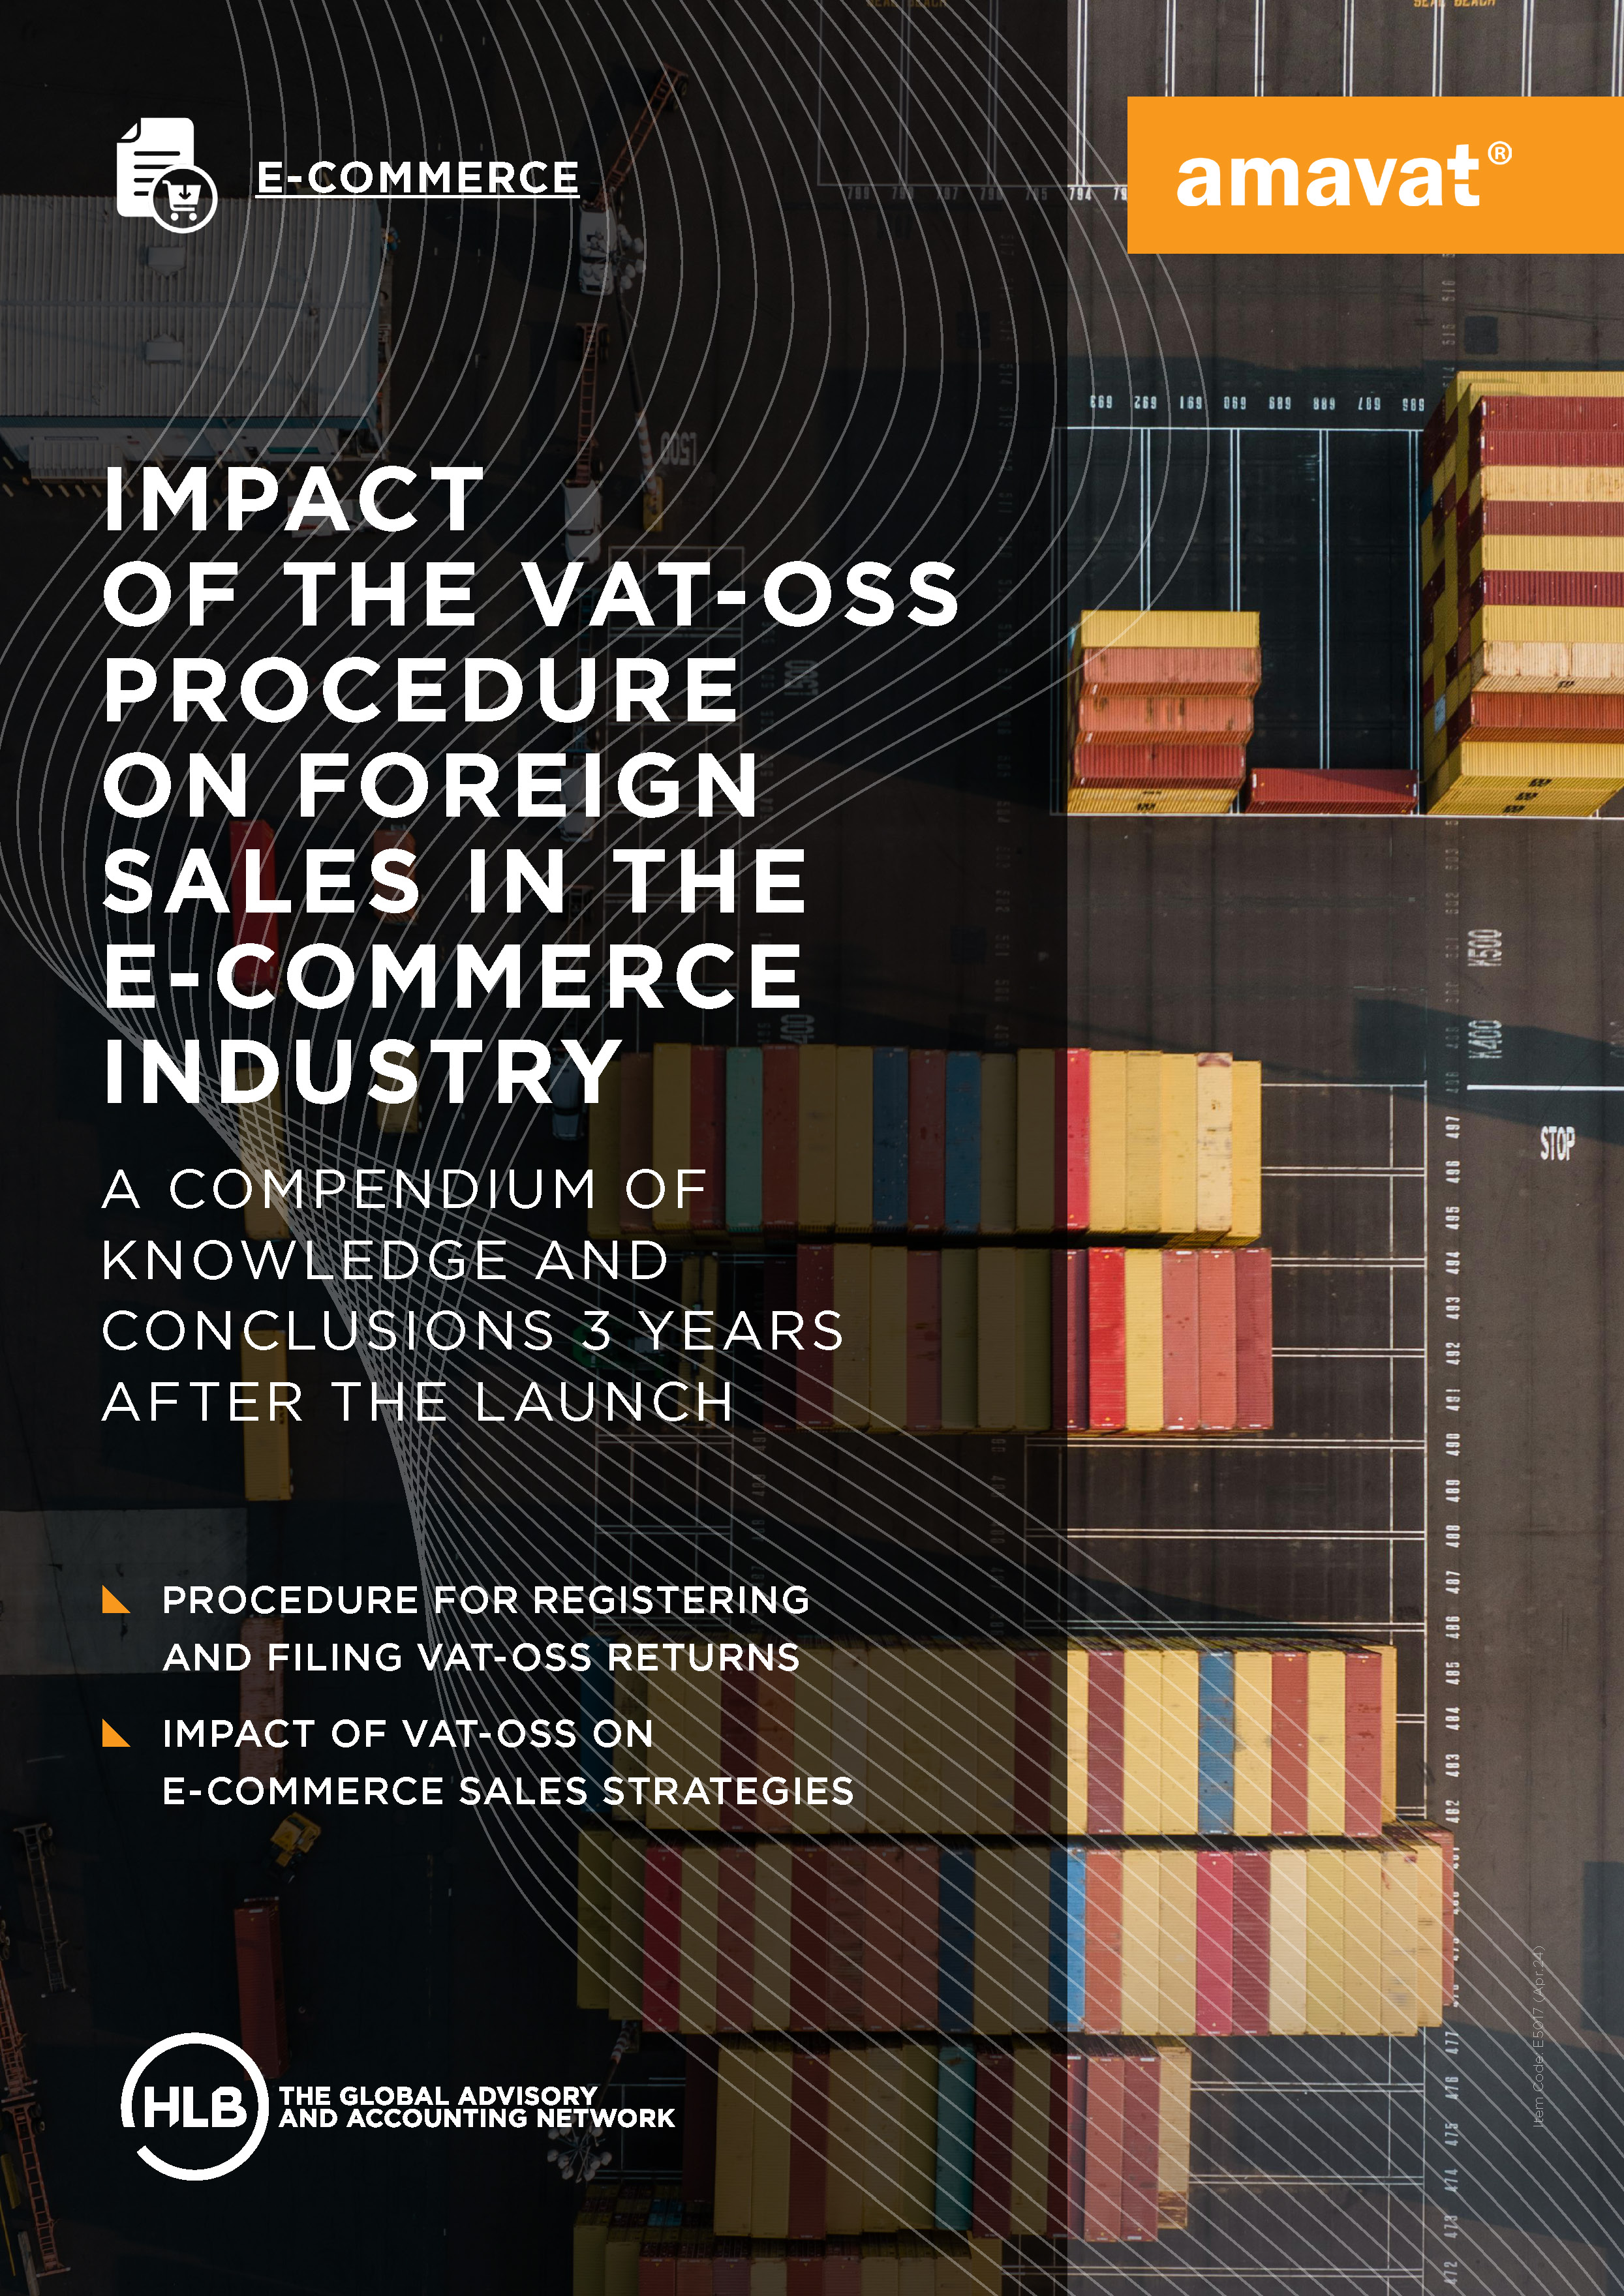 Impact of the VAT-OSS procedure on foreign sales in the e-commerce industry